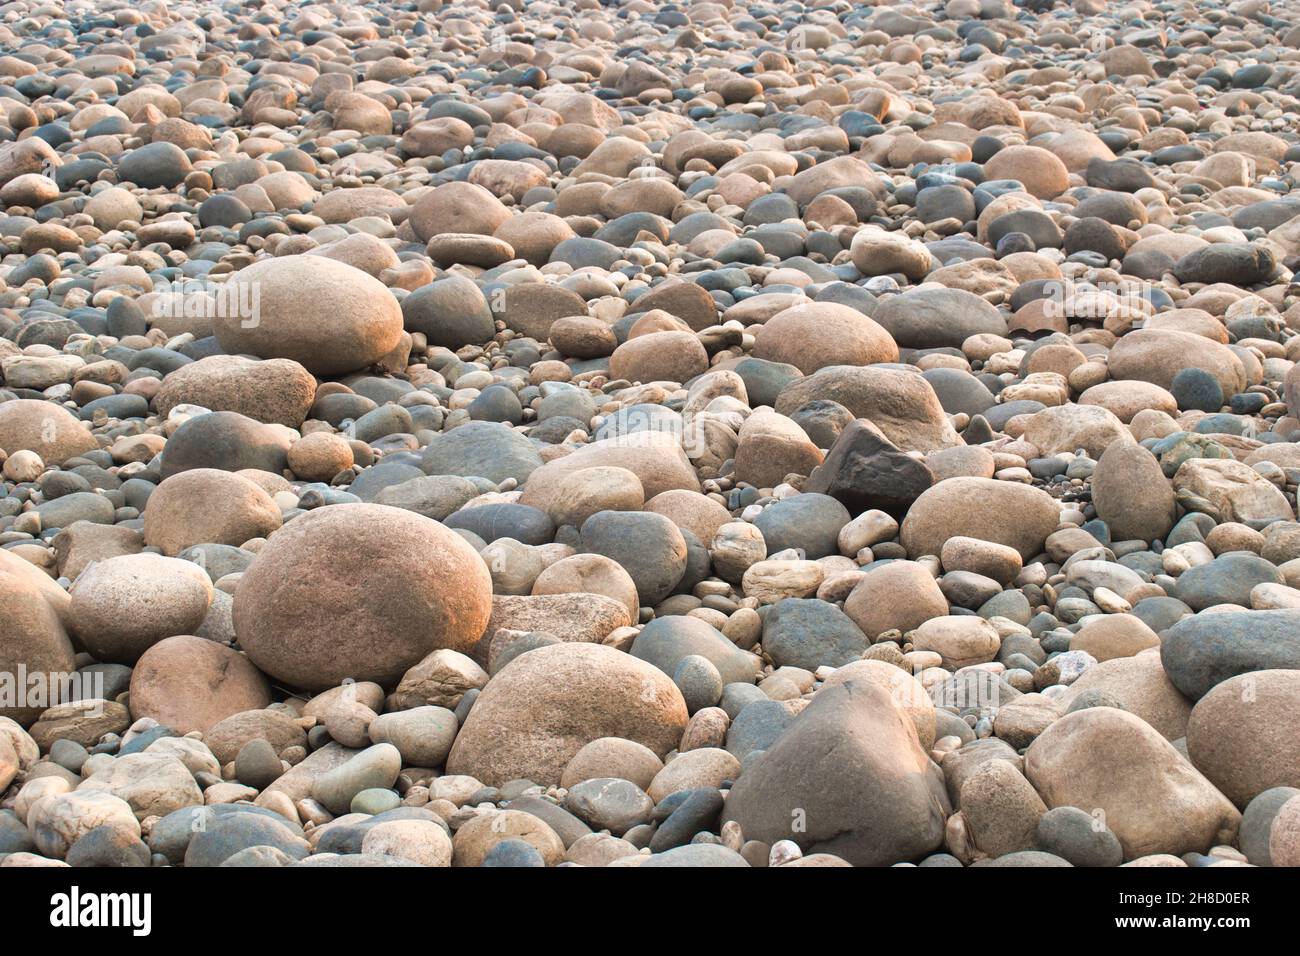 Pebbles are the clast of rock with a particle based on the Udden-Wentworth scale of sedimentology. Stock Photo